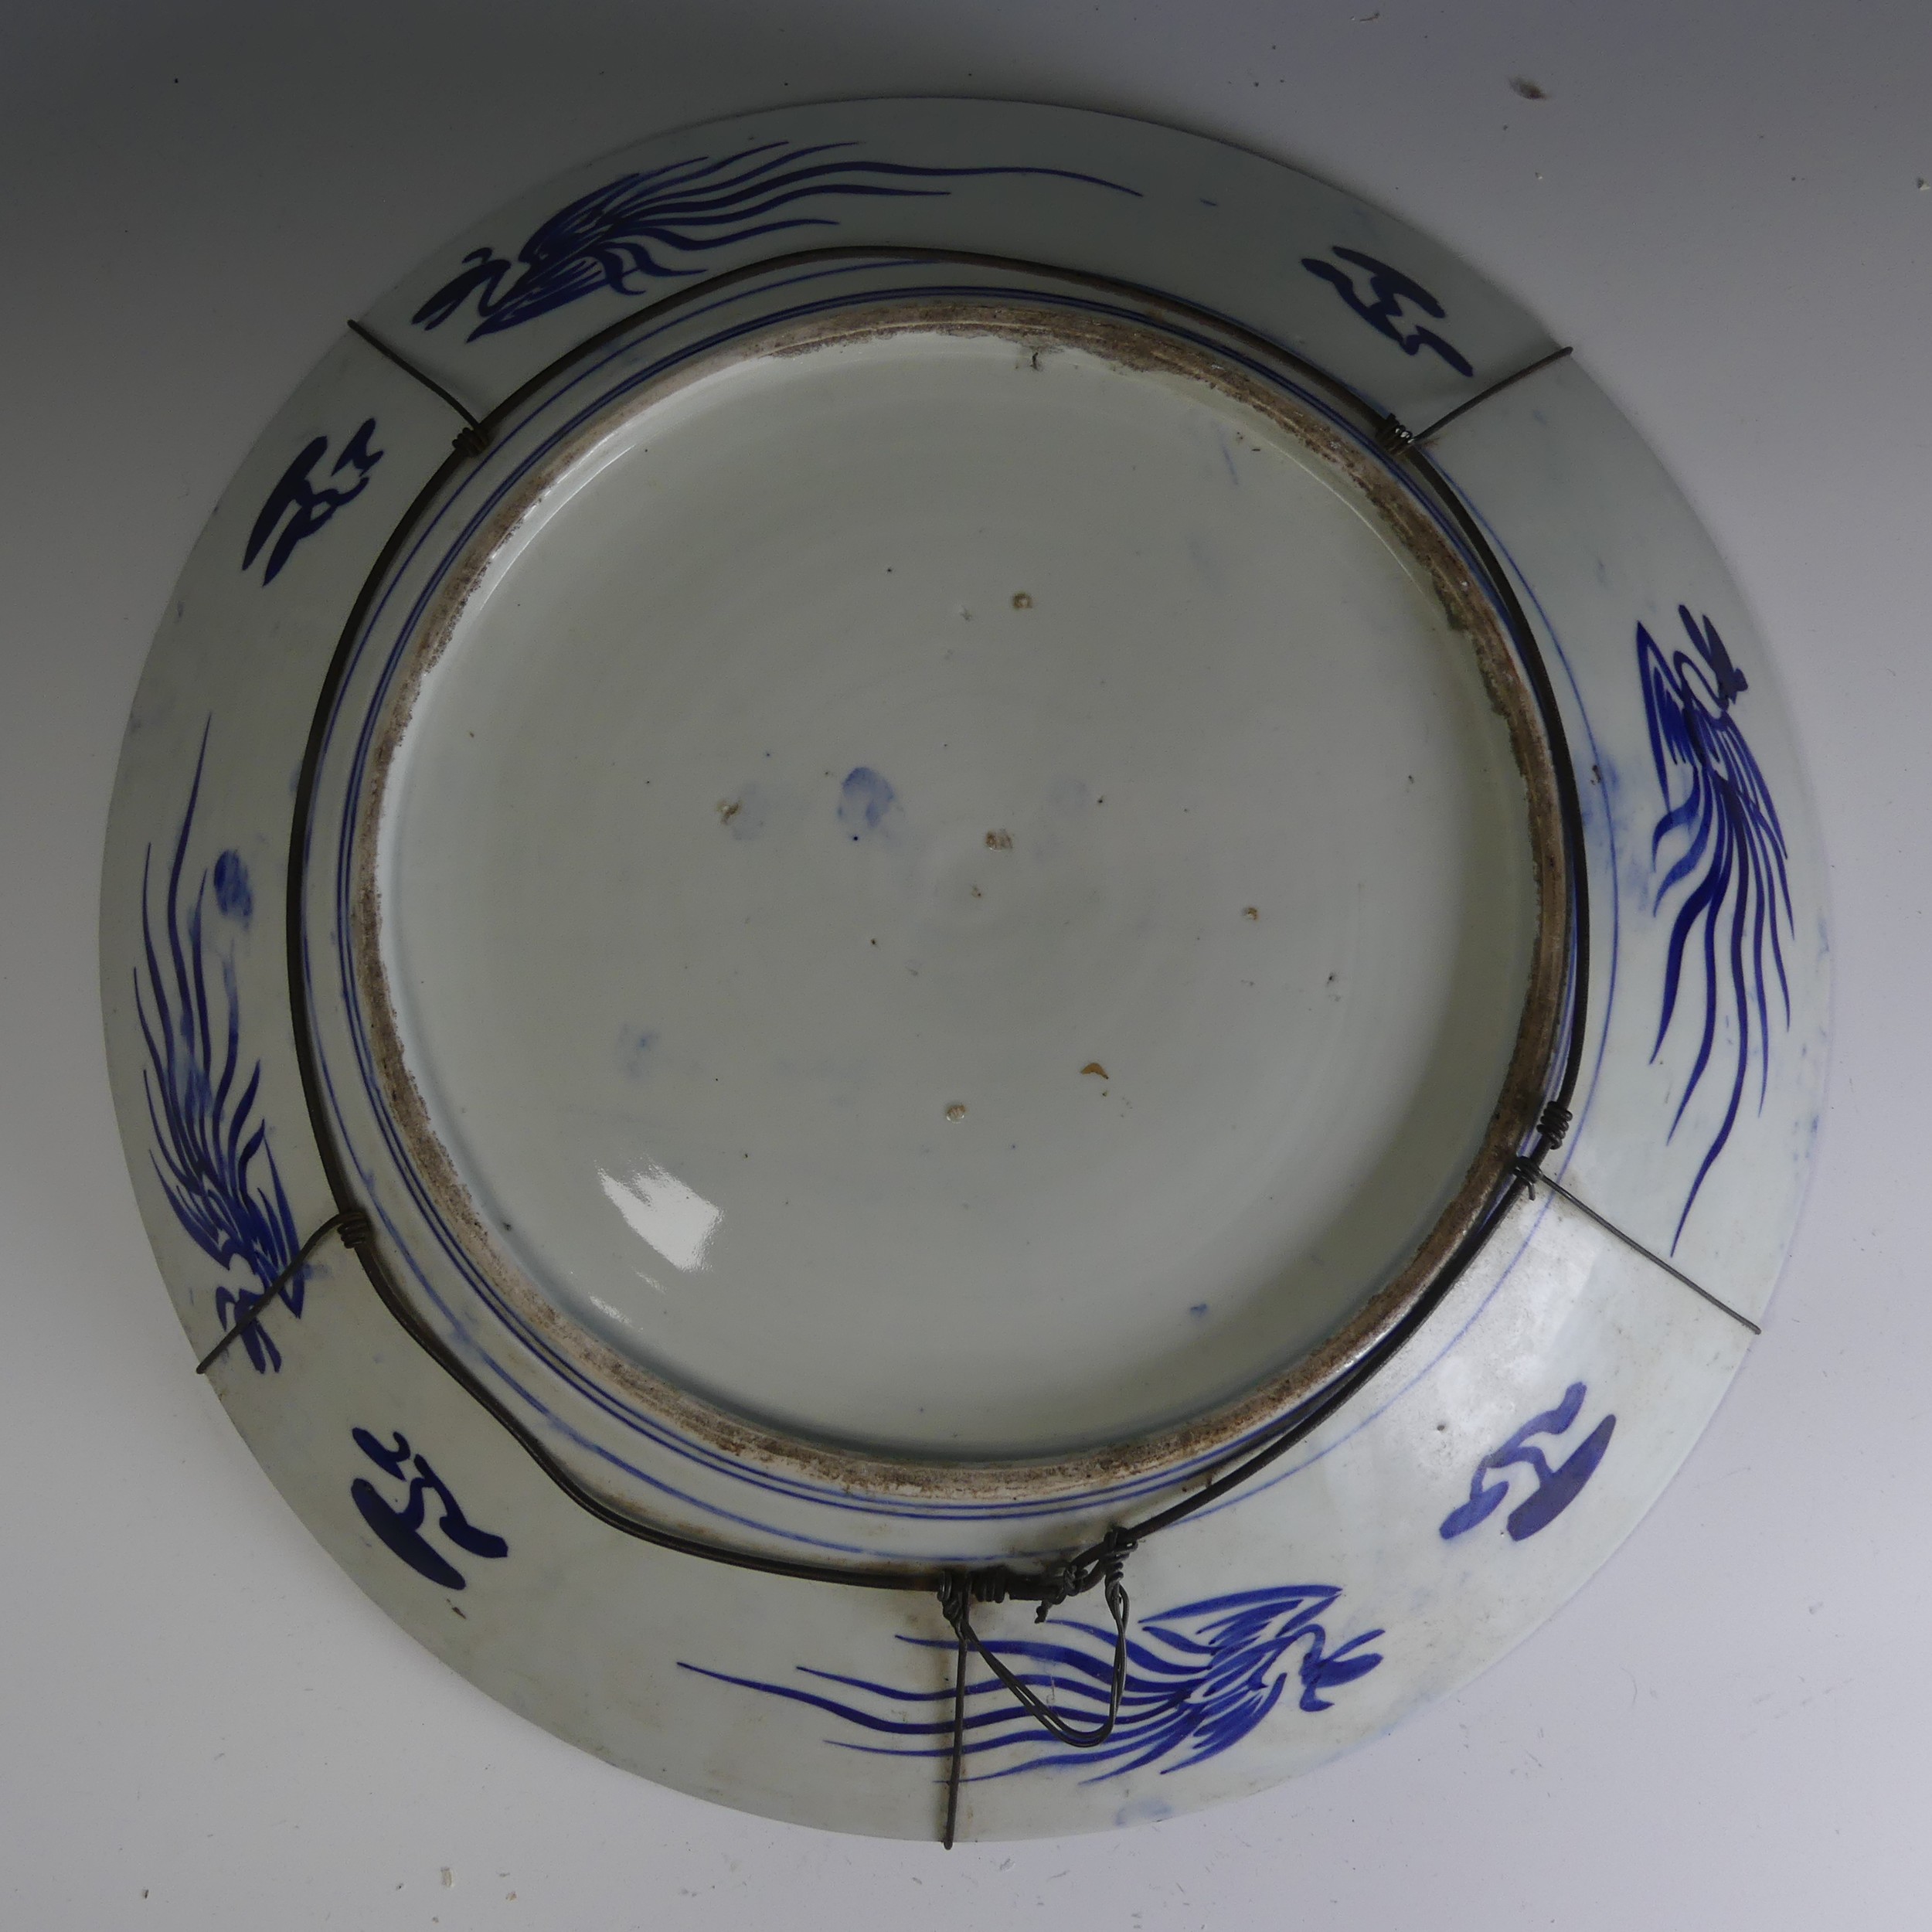 An antique Japanese Arita porcelain Charger, un underglaze blue and white depiction of mountains, - Image 2 of 2